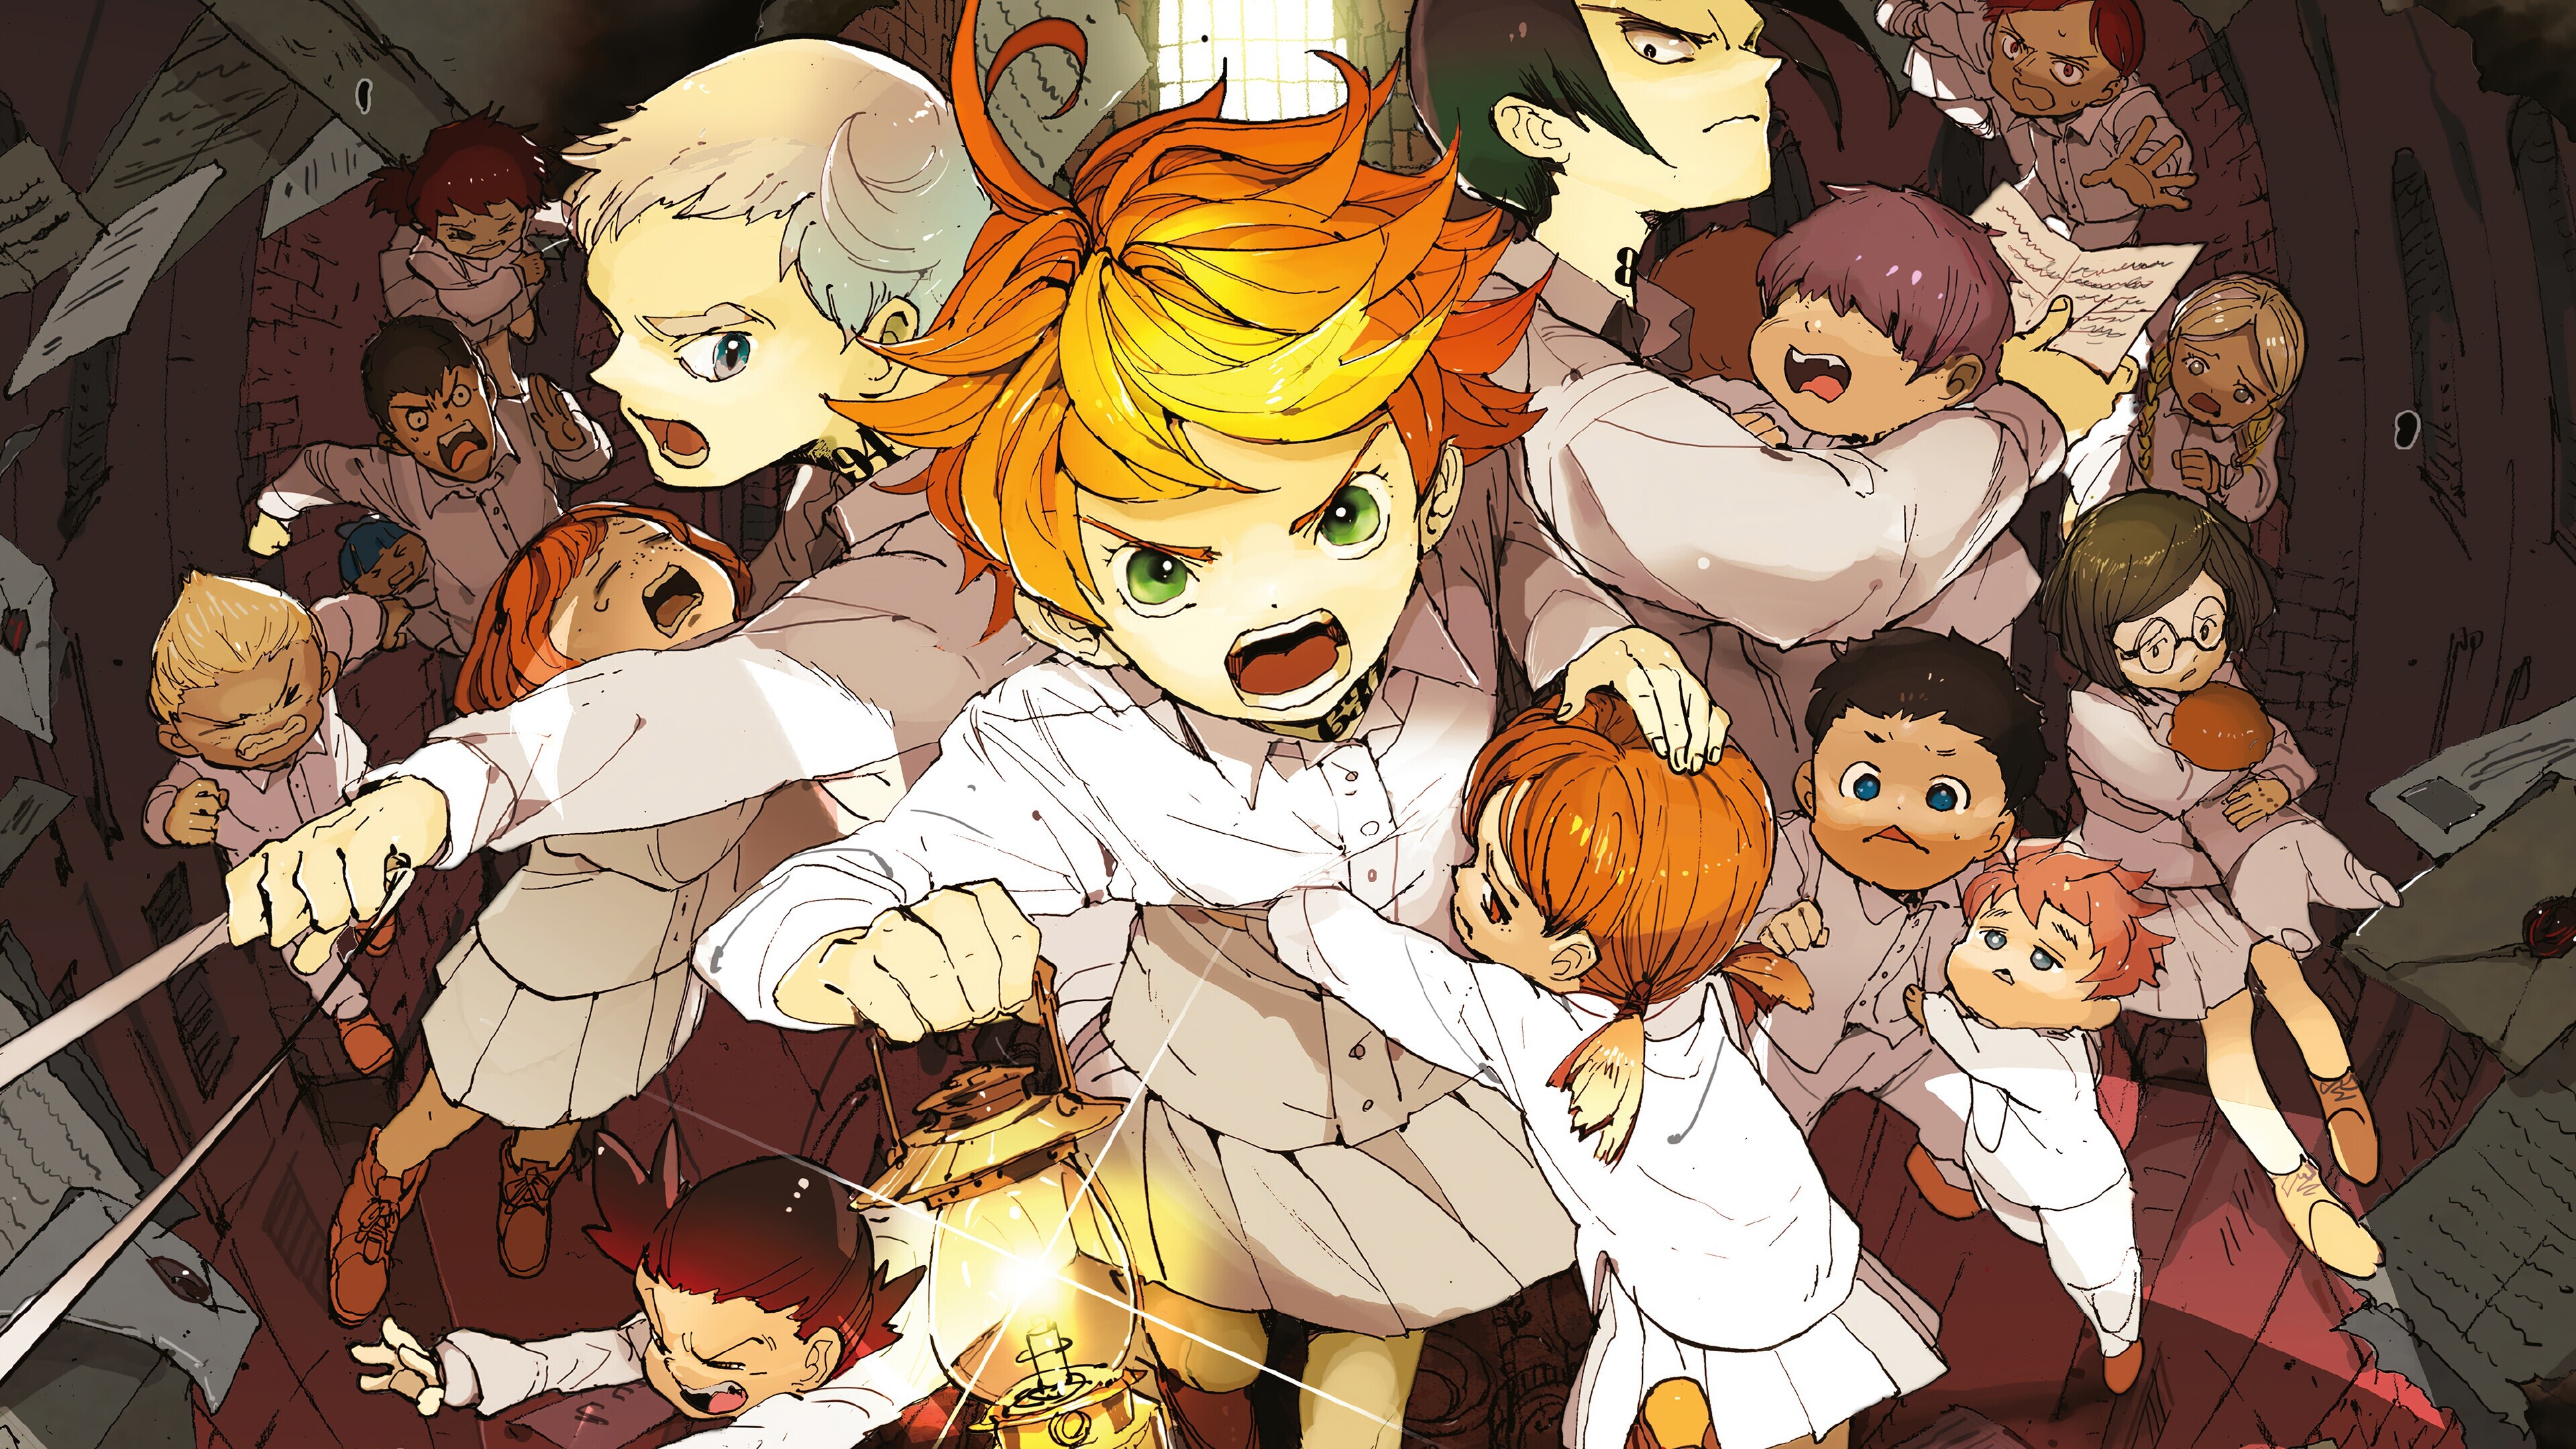 The Promised Neverland: Emma, Ray, Norman, Takahiro Obata composed the series' music. 3840x2160 4K Wallpaper.